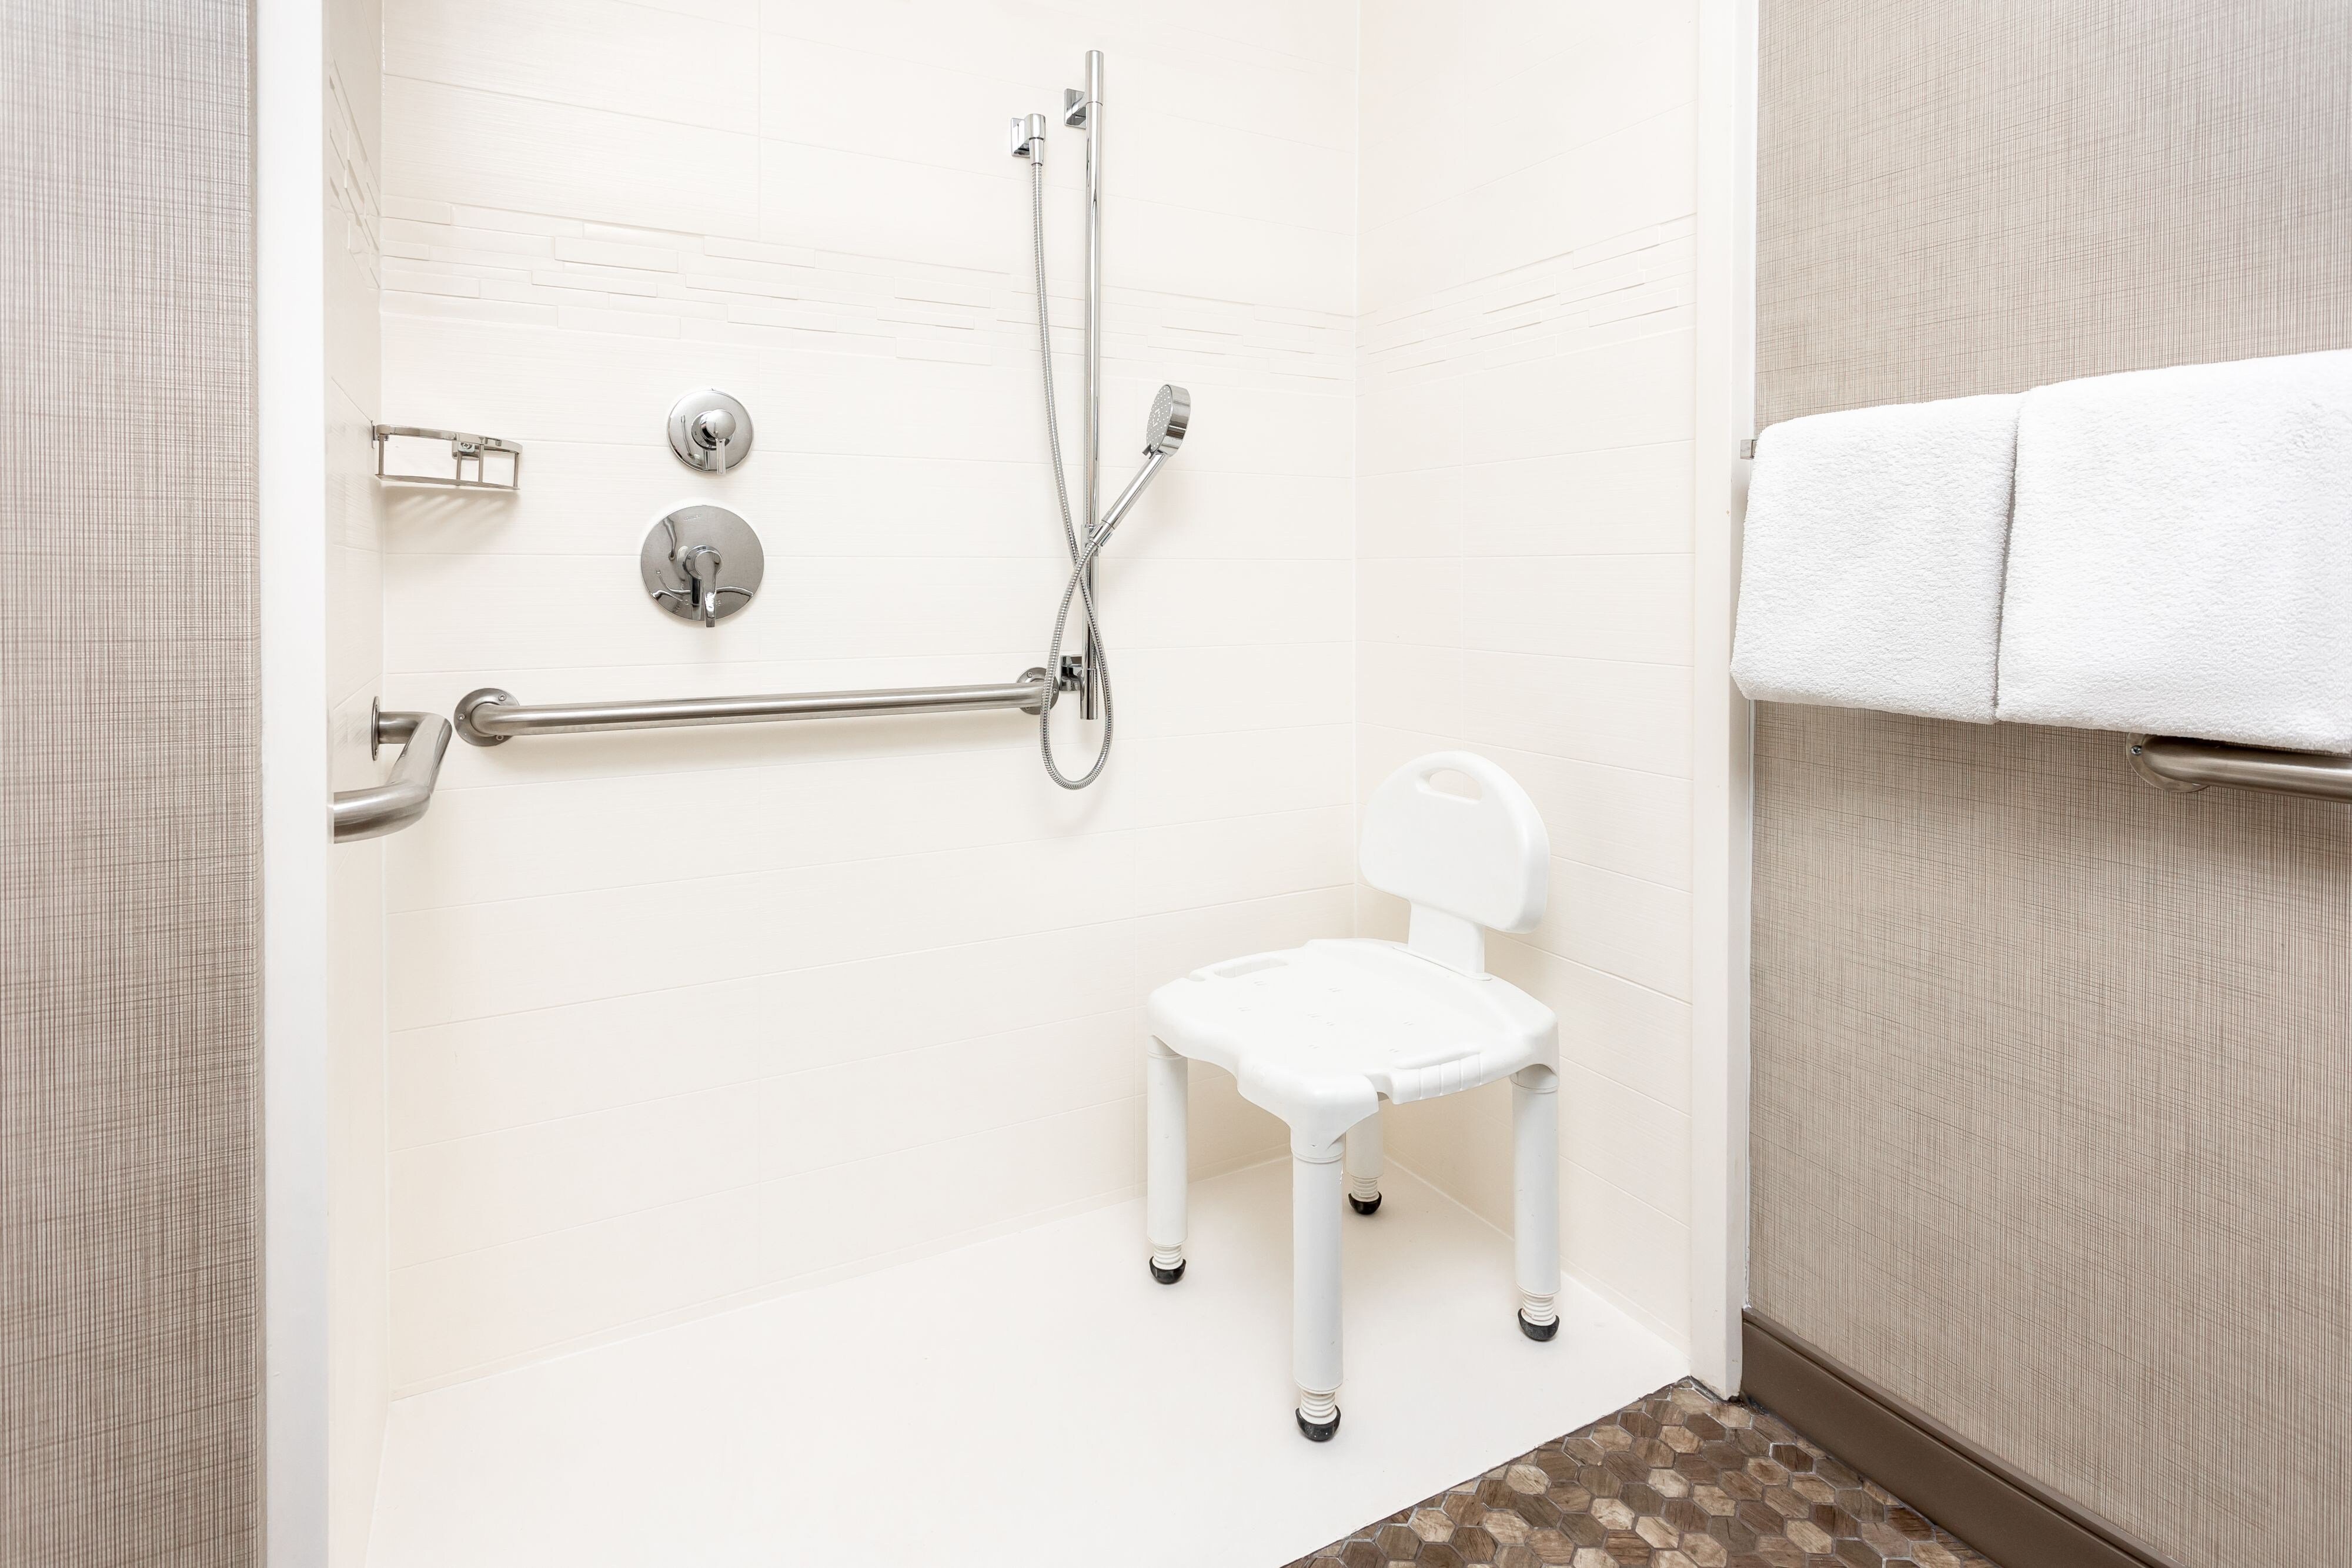 Accessible roll-in shower